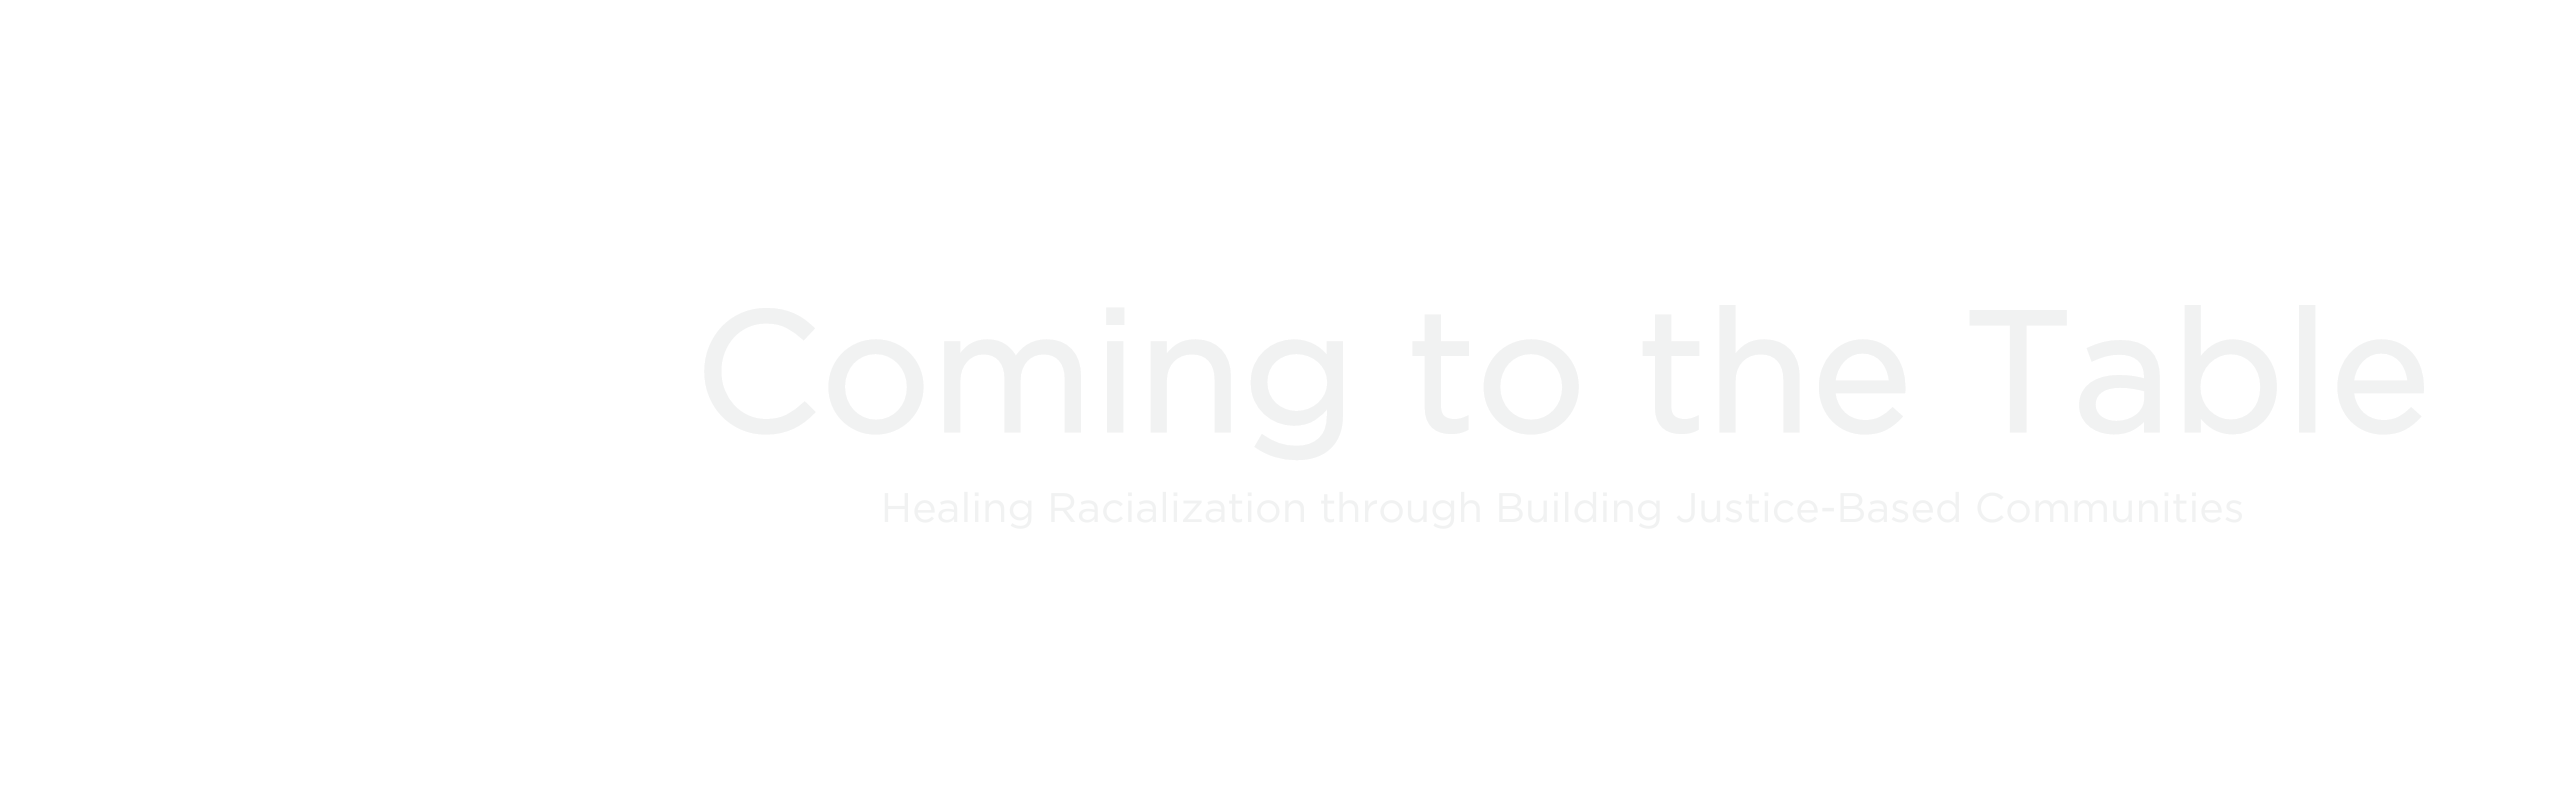 Coming to the Table - Banner text